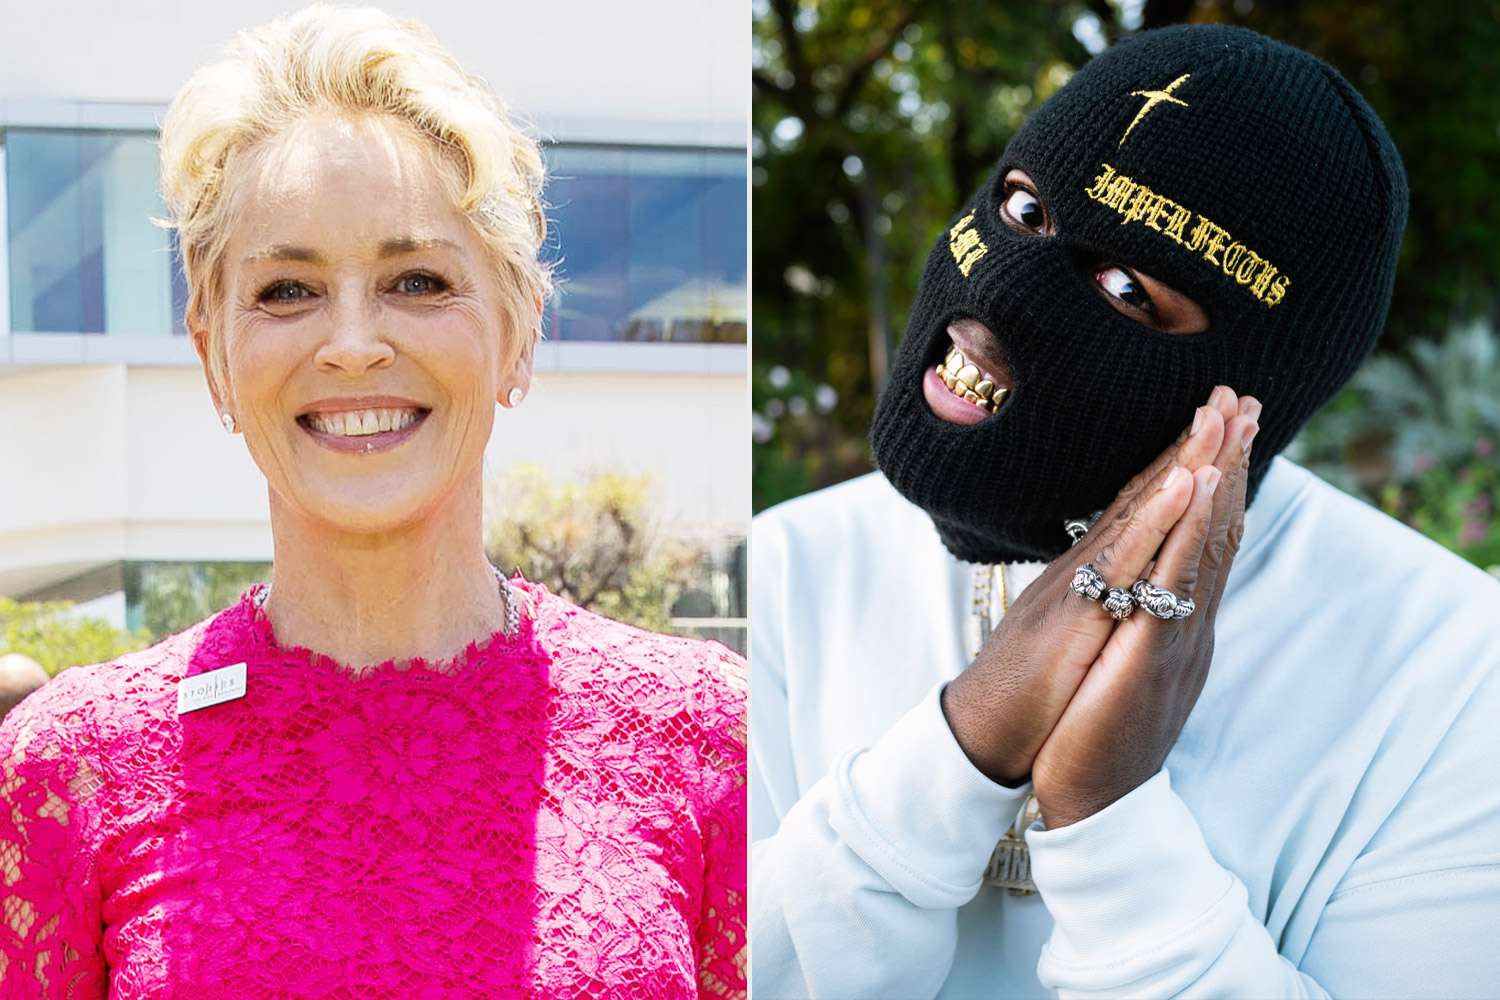 Sharon Stone and Rapper RMR Are Friends, Have Been Hanging Out: Source |  PEOPLE.com